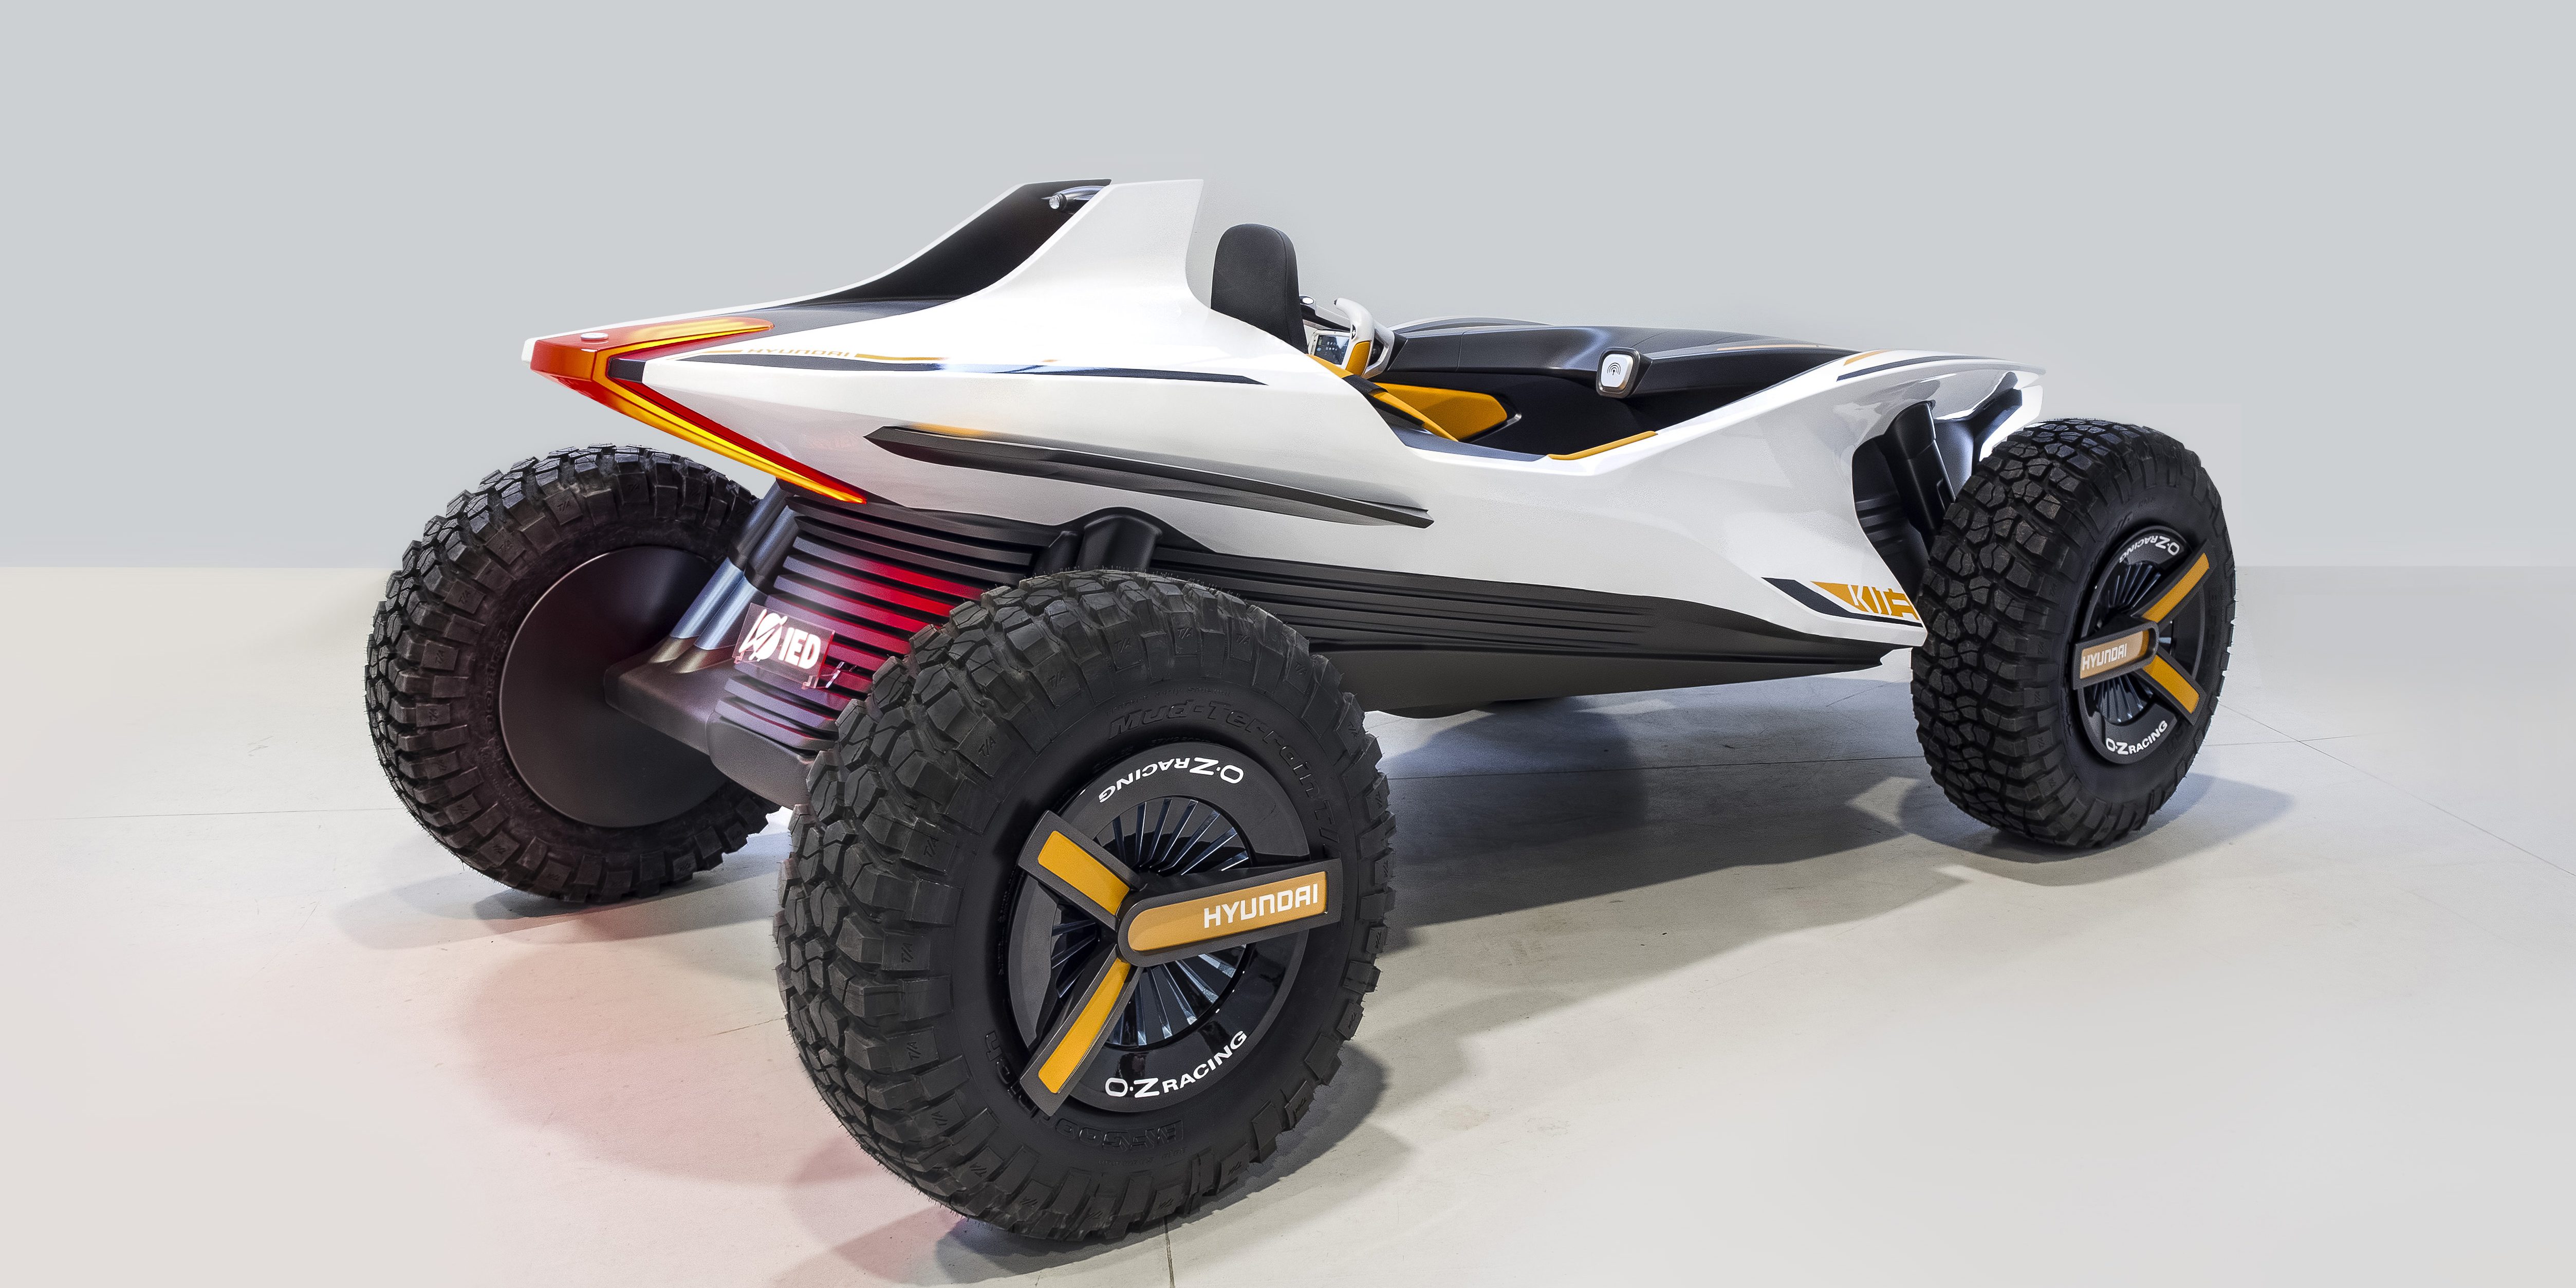 dune buggy concept